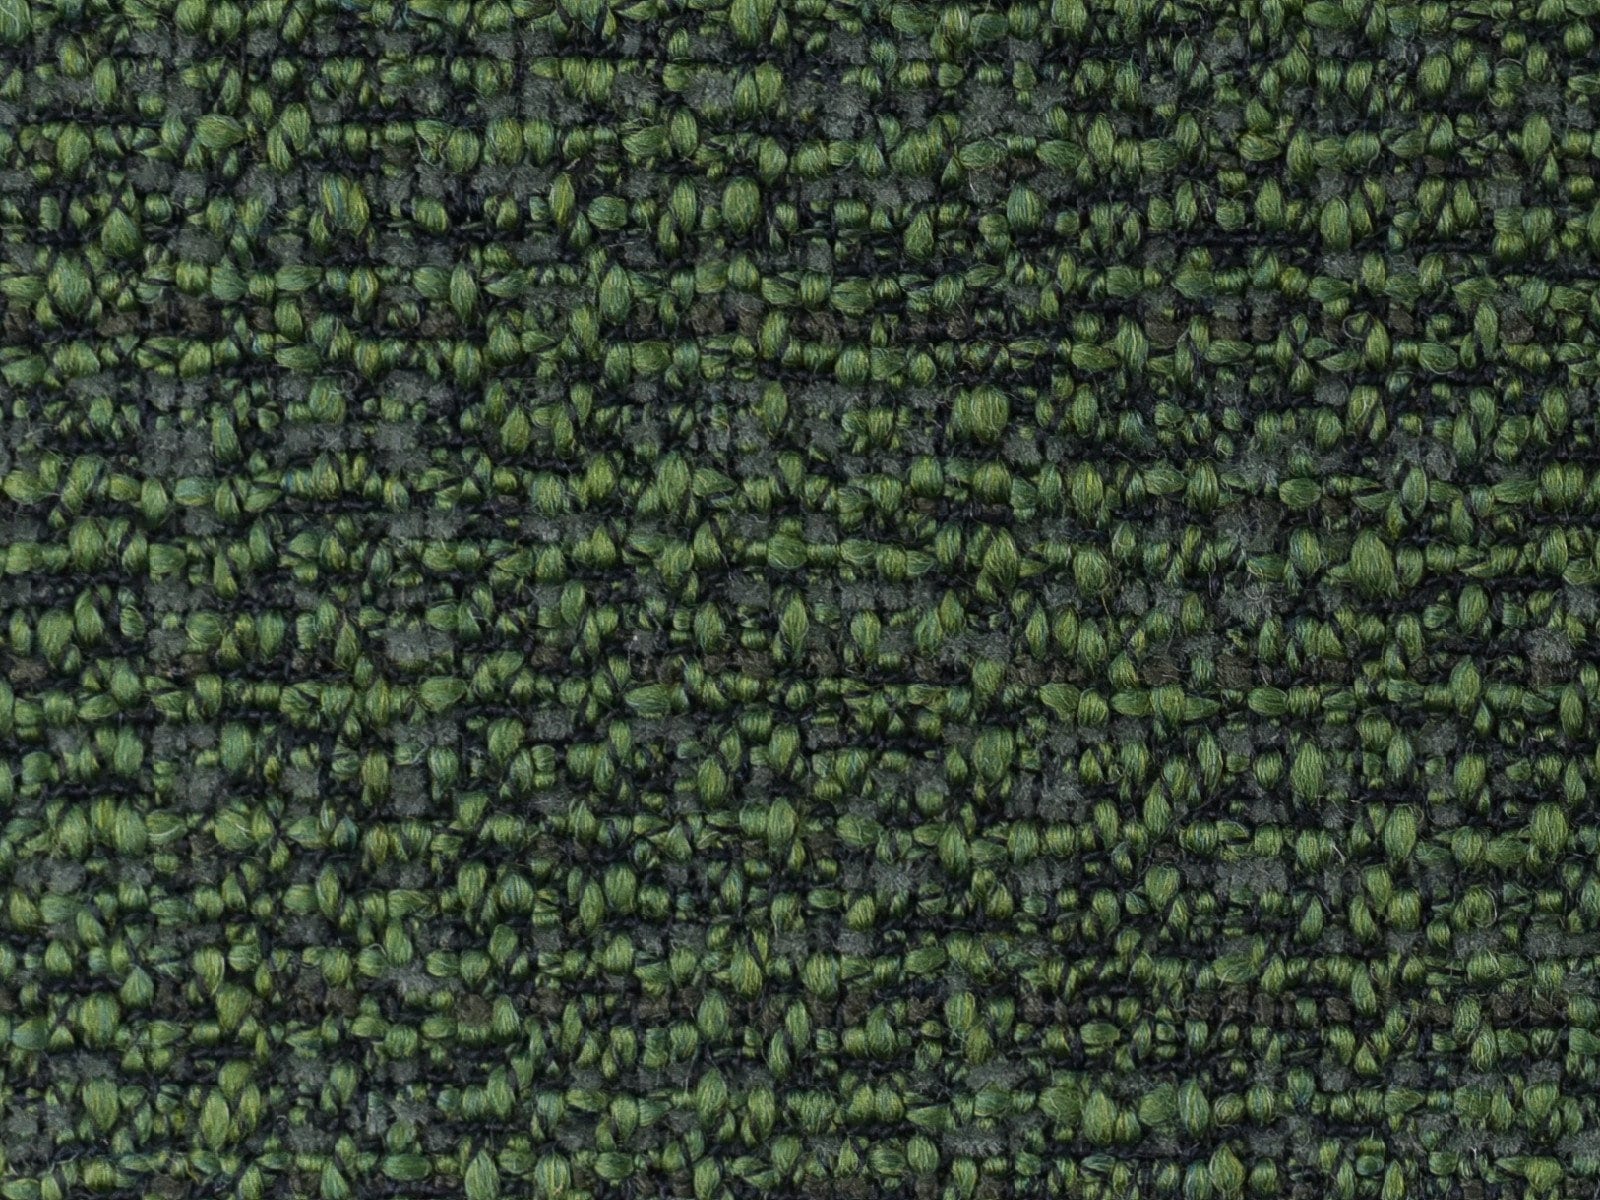 Contemporary Coarse Woven Textured Upholstery Fabric By The Yard 57"W/600GSM-Capability Garden Green